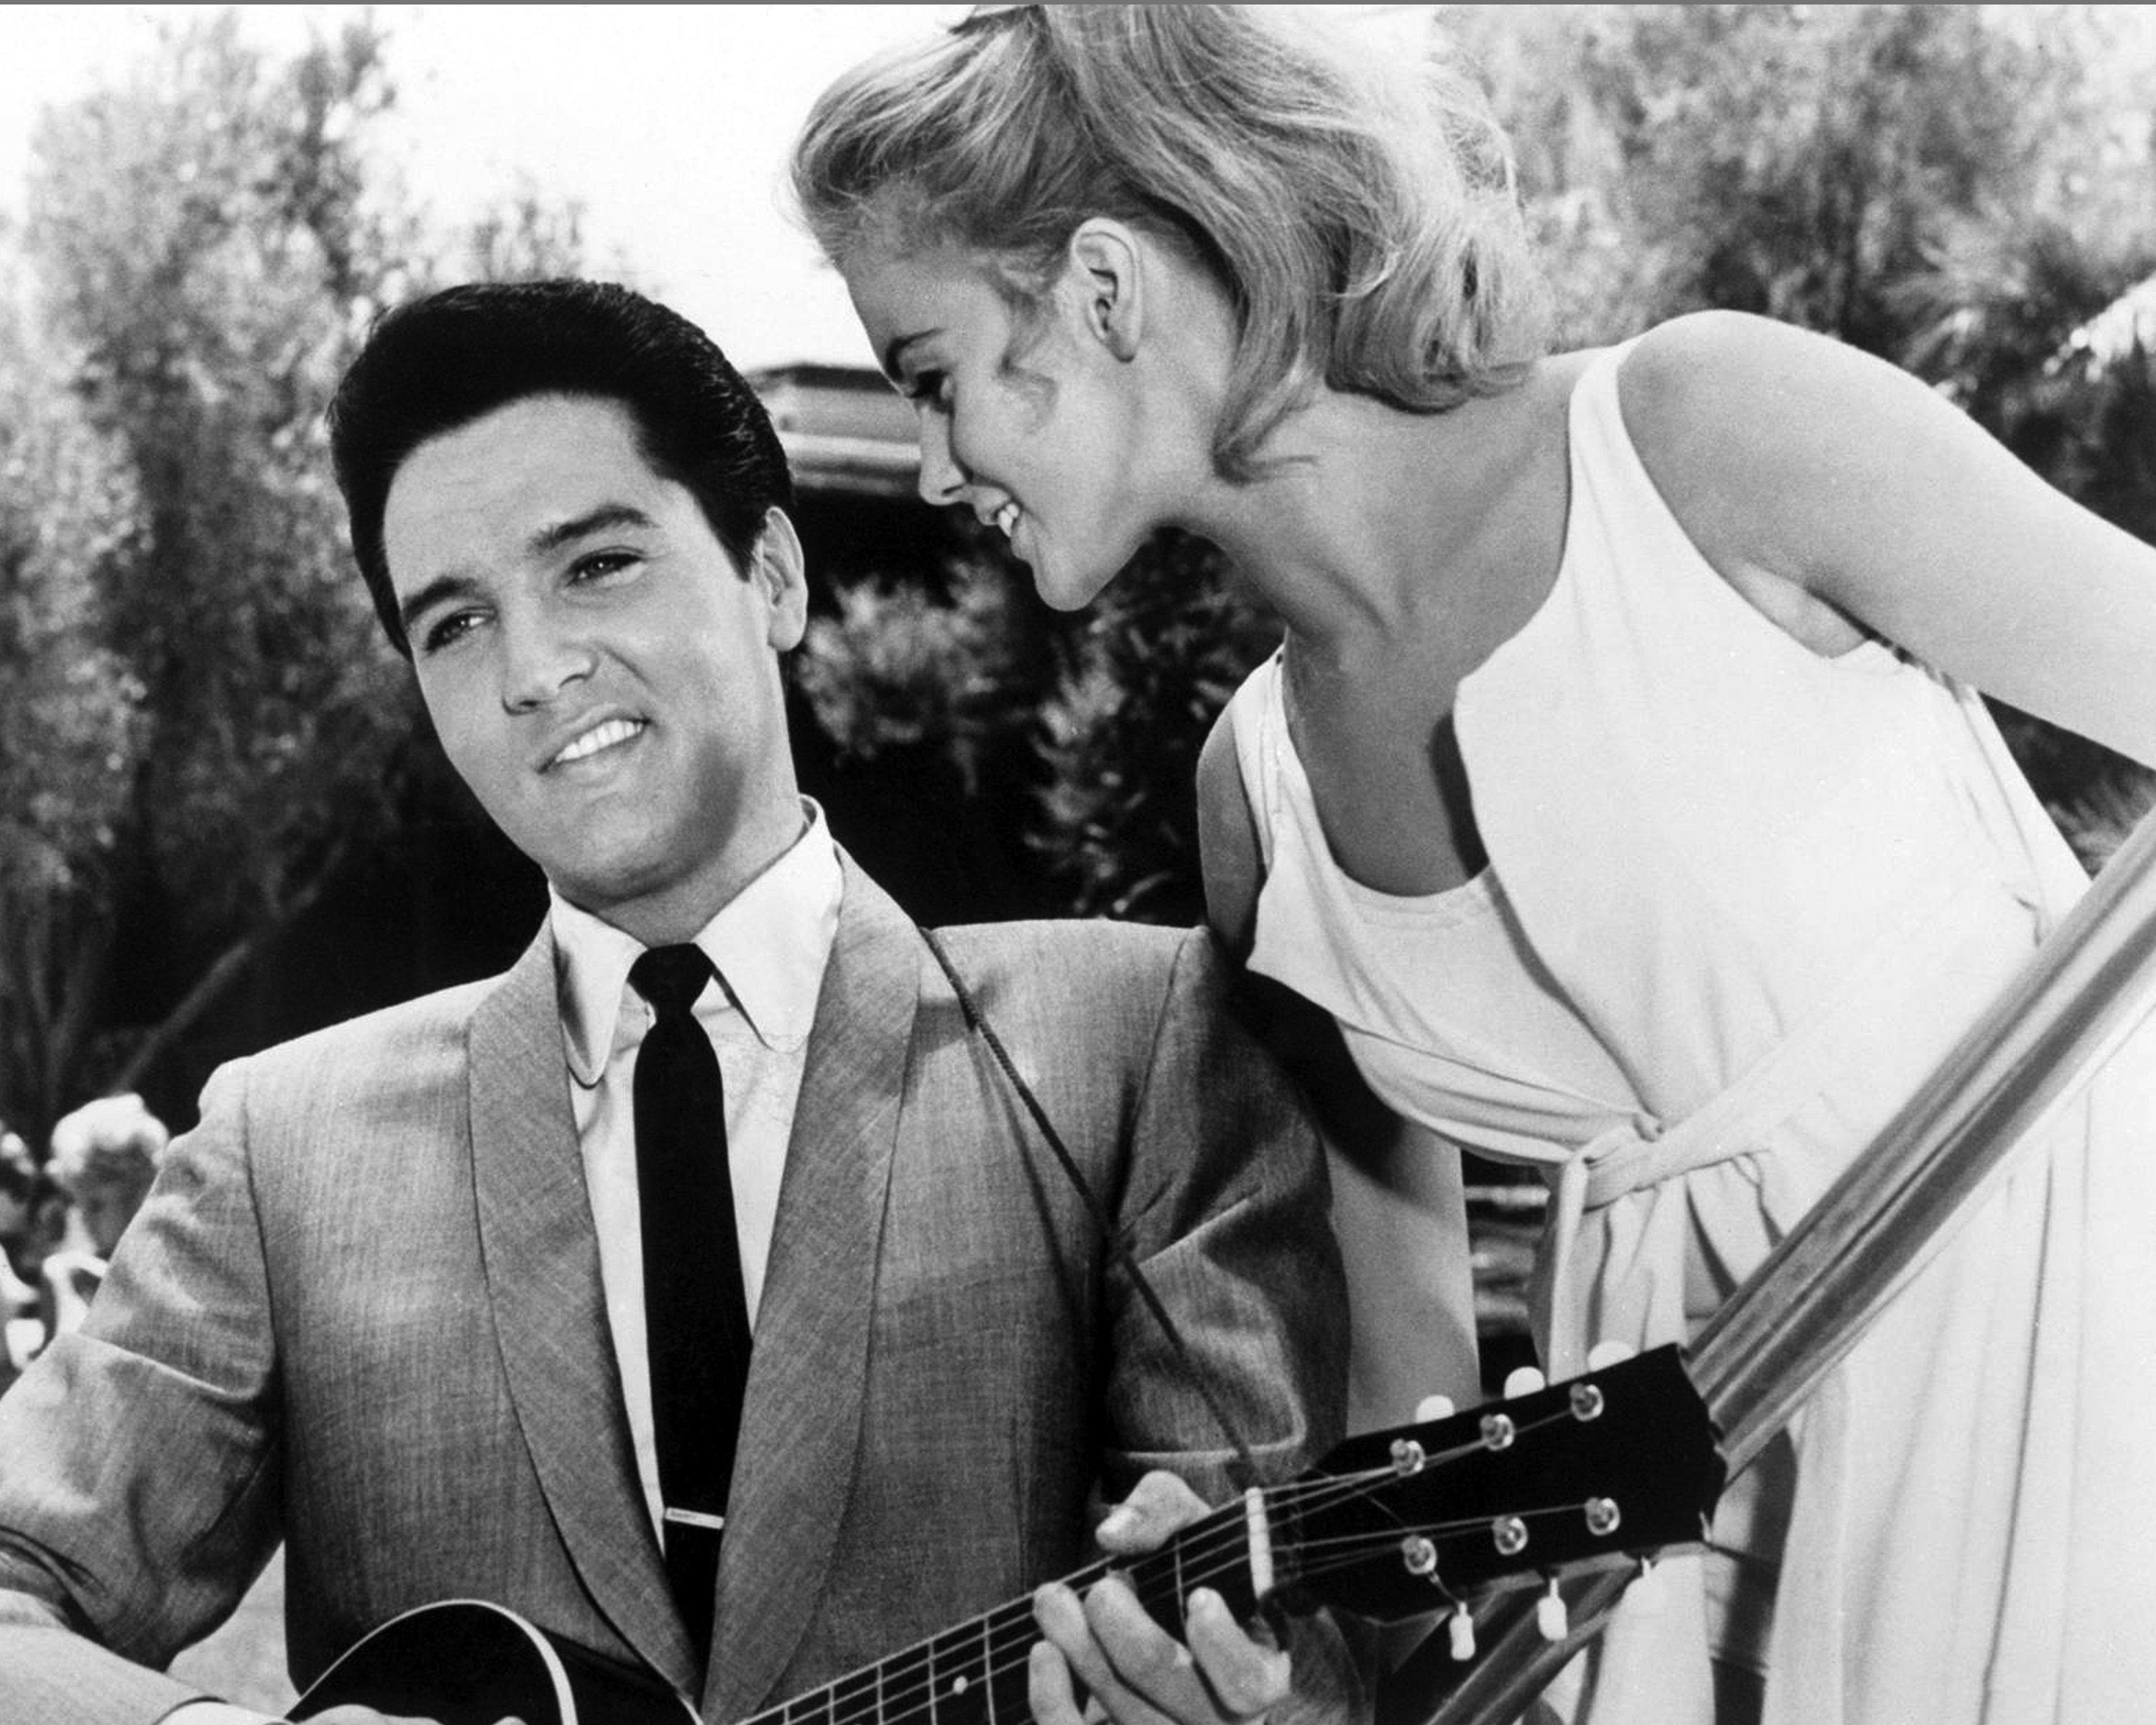 Swedish-American actress Ann-Margret with Elvis Presley (1935 - 1977) in the musical film 'Viva Las Vegas', directed by George Sidney, 1964. | Source: Getty Images